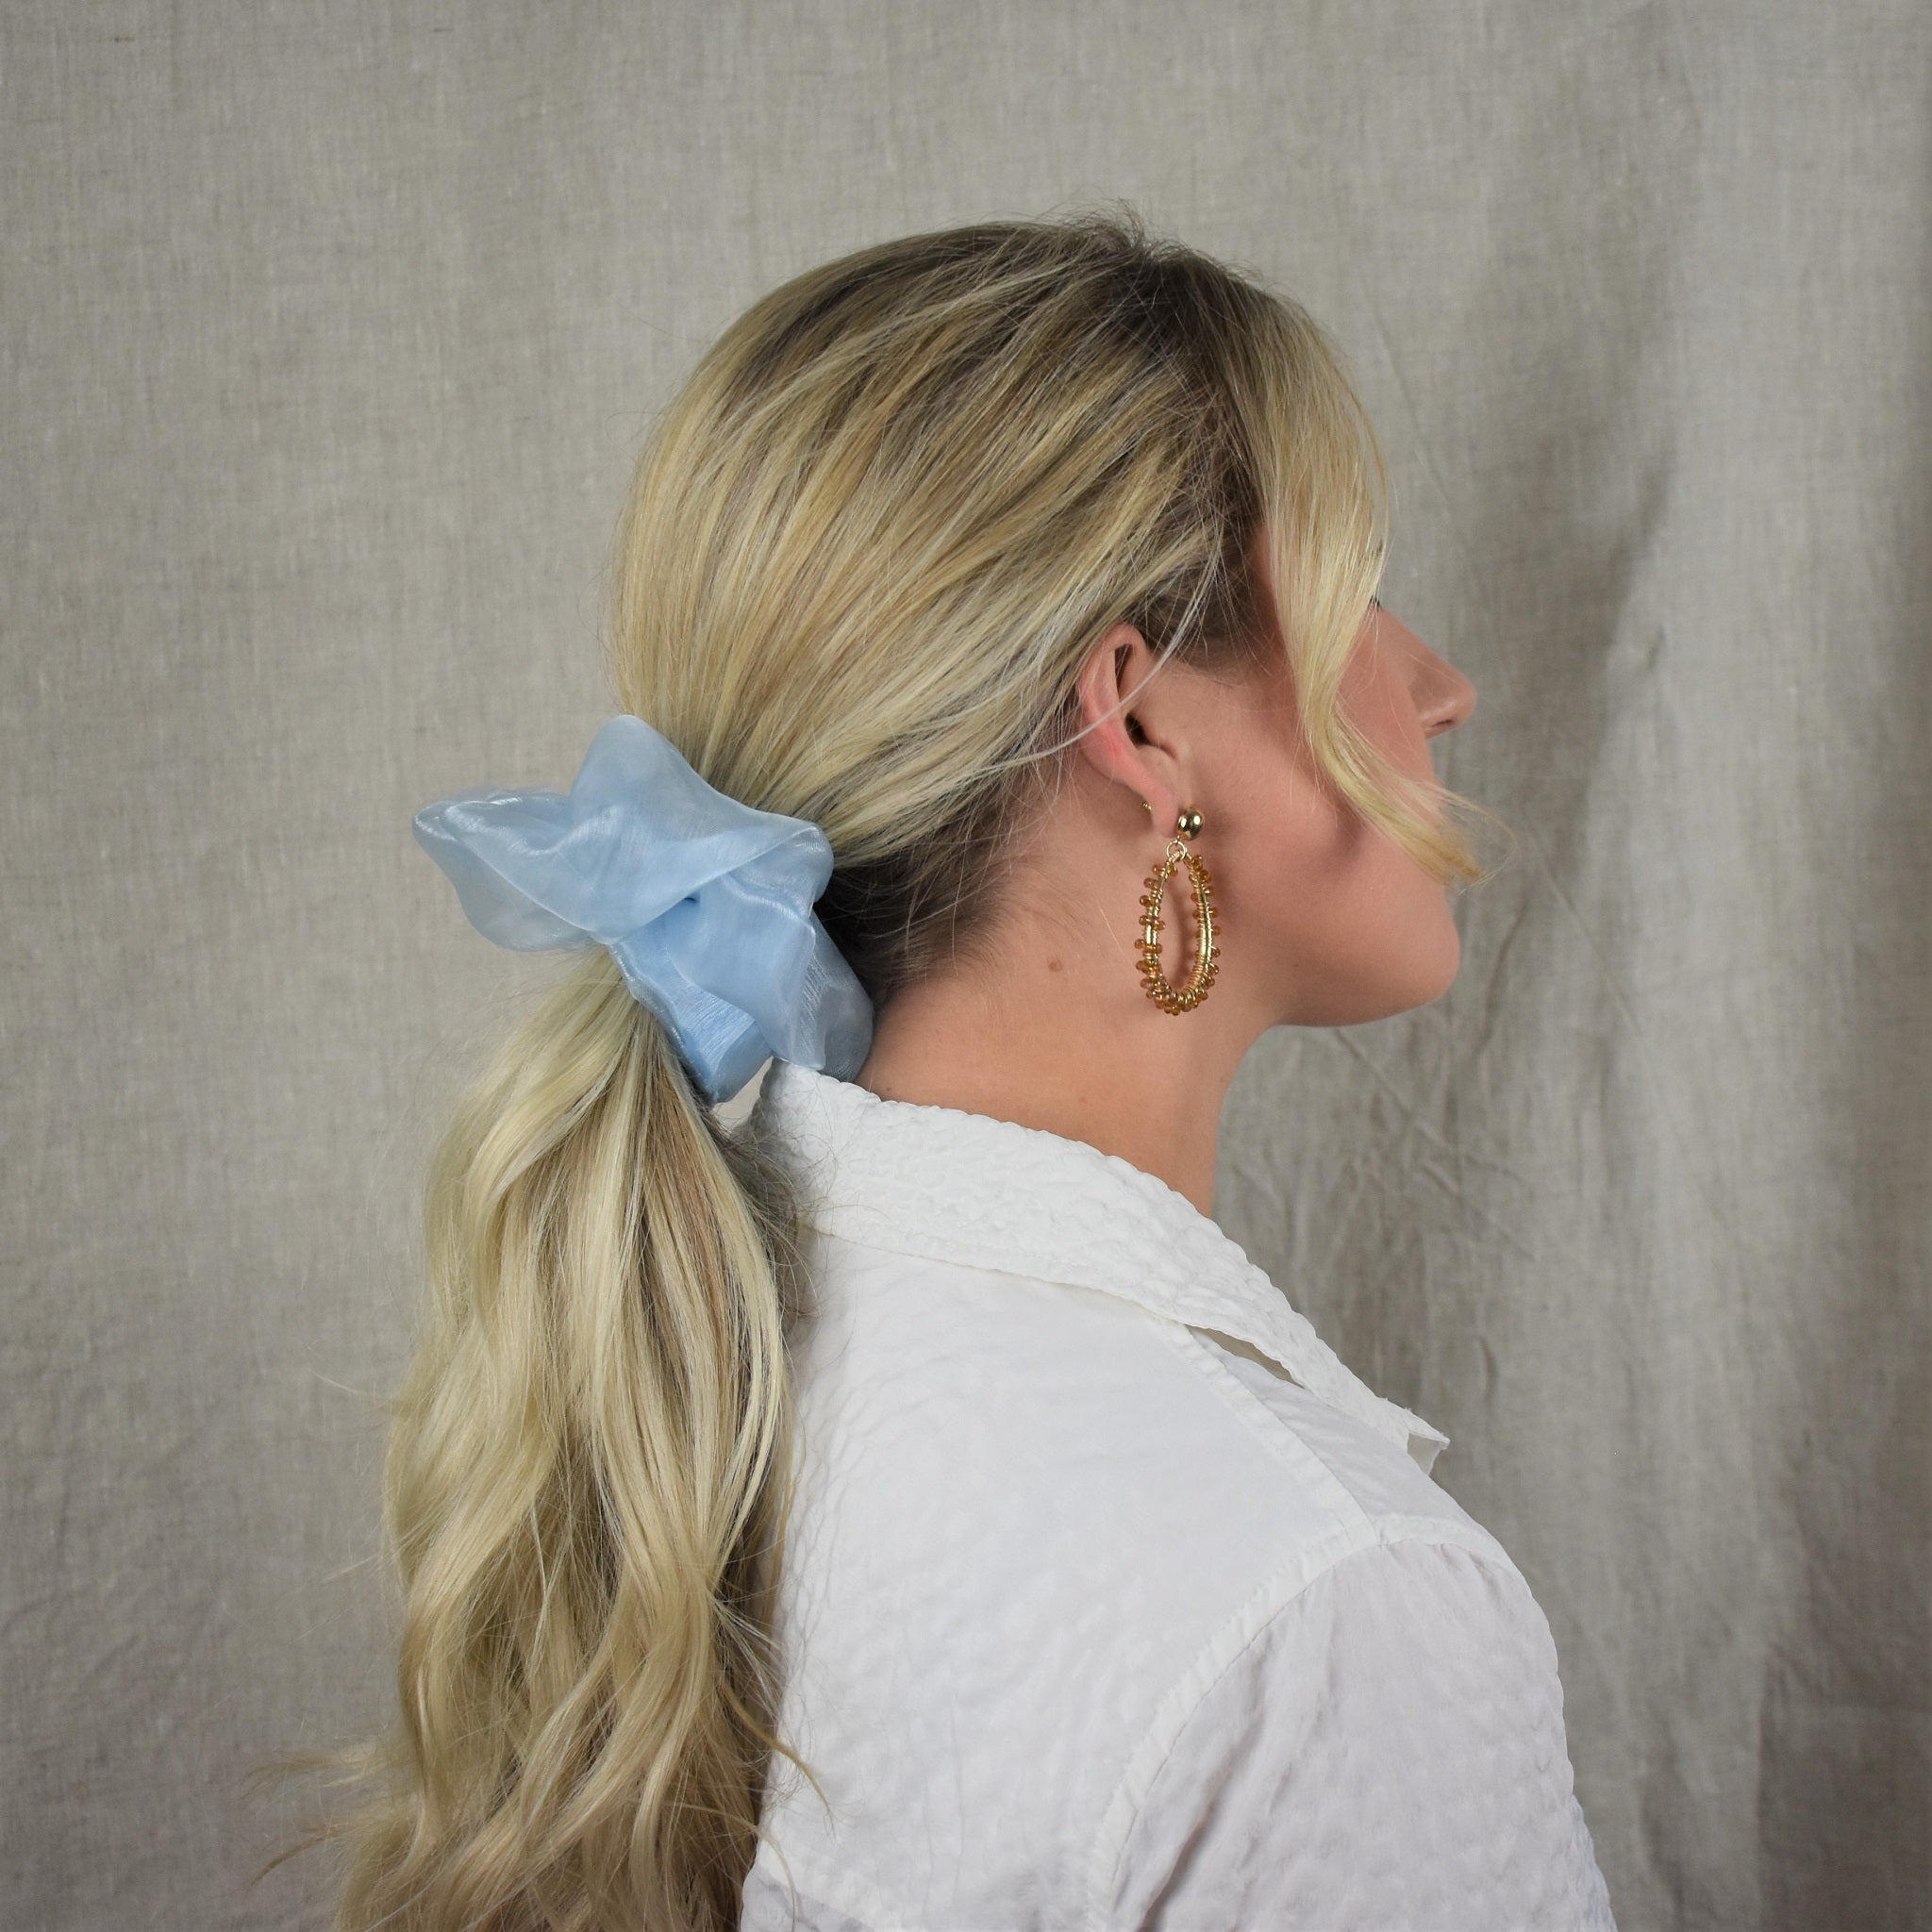 HOW TO: style our XL scrunchies